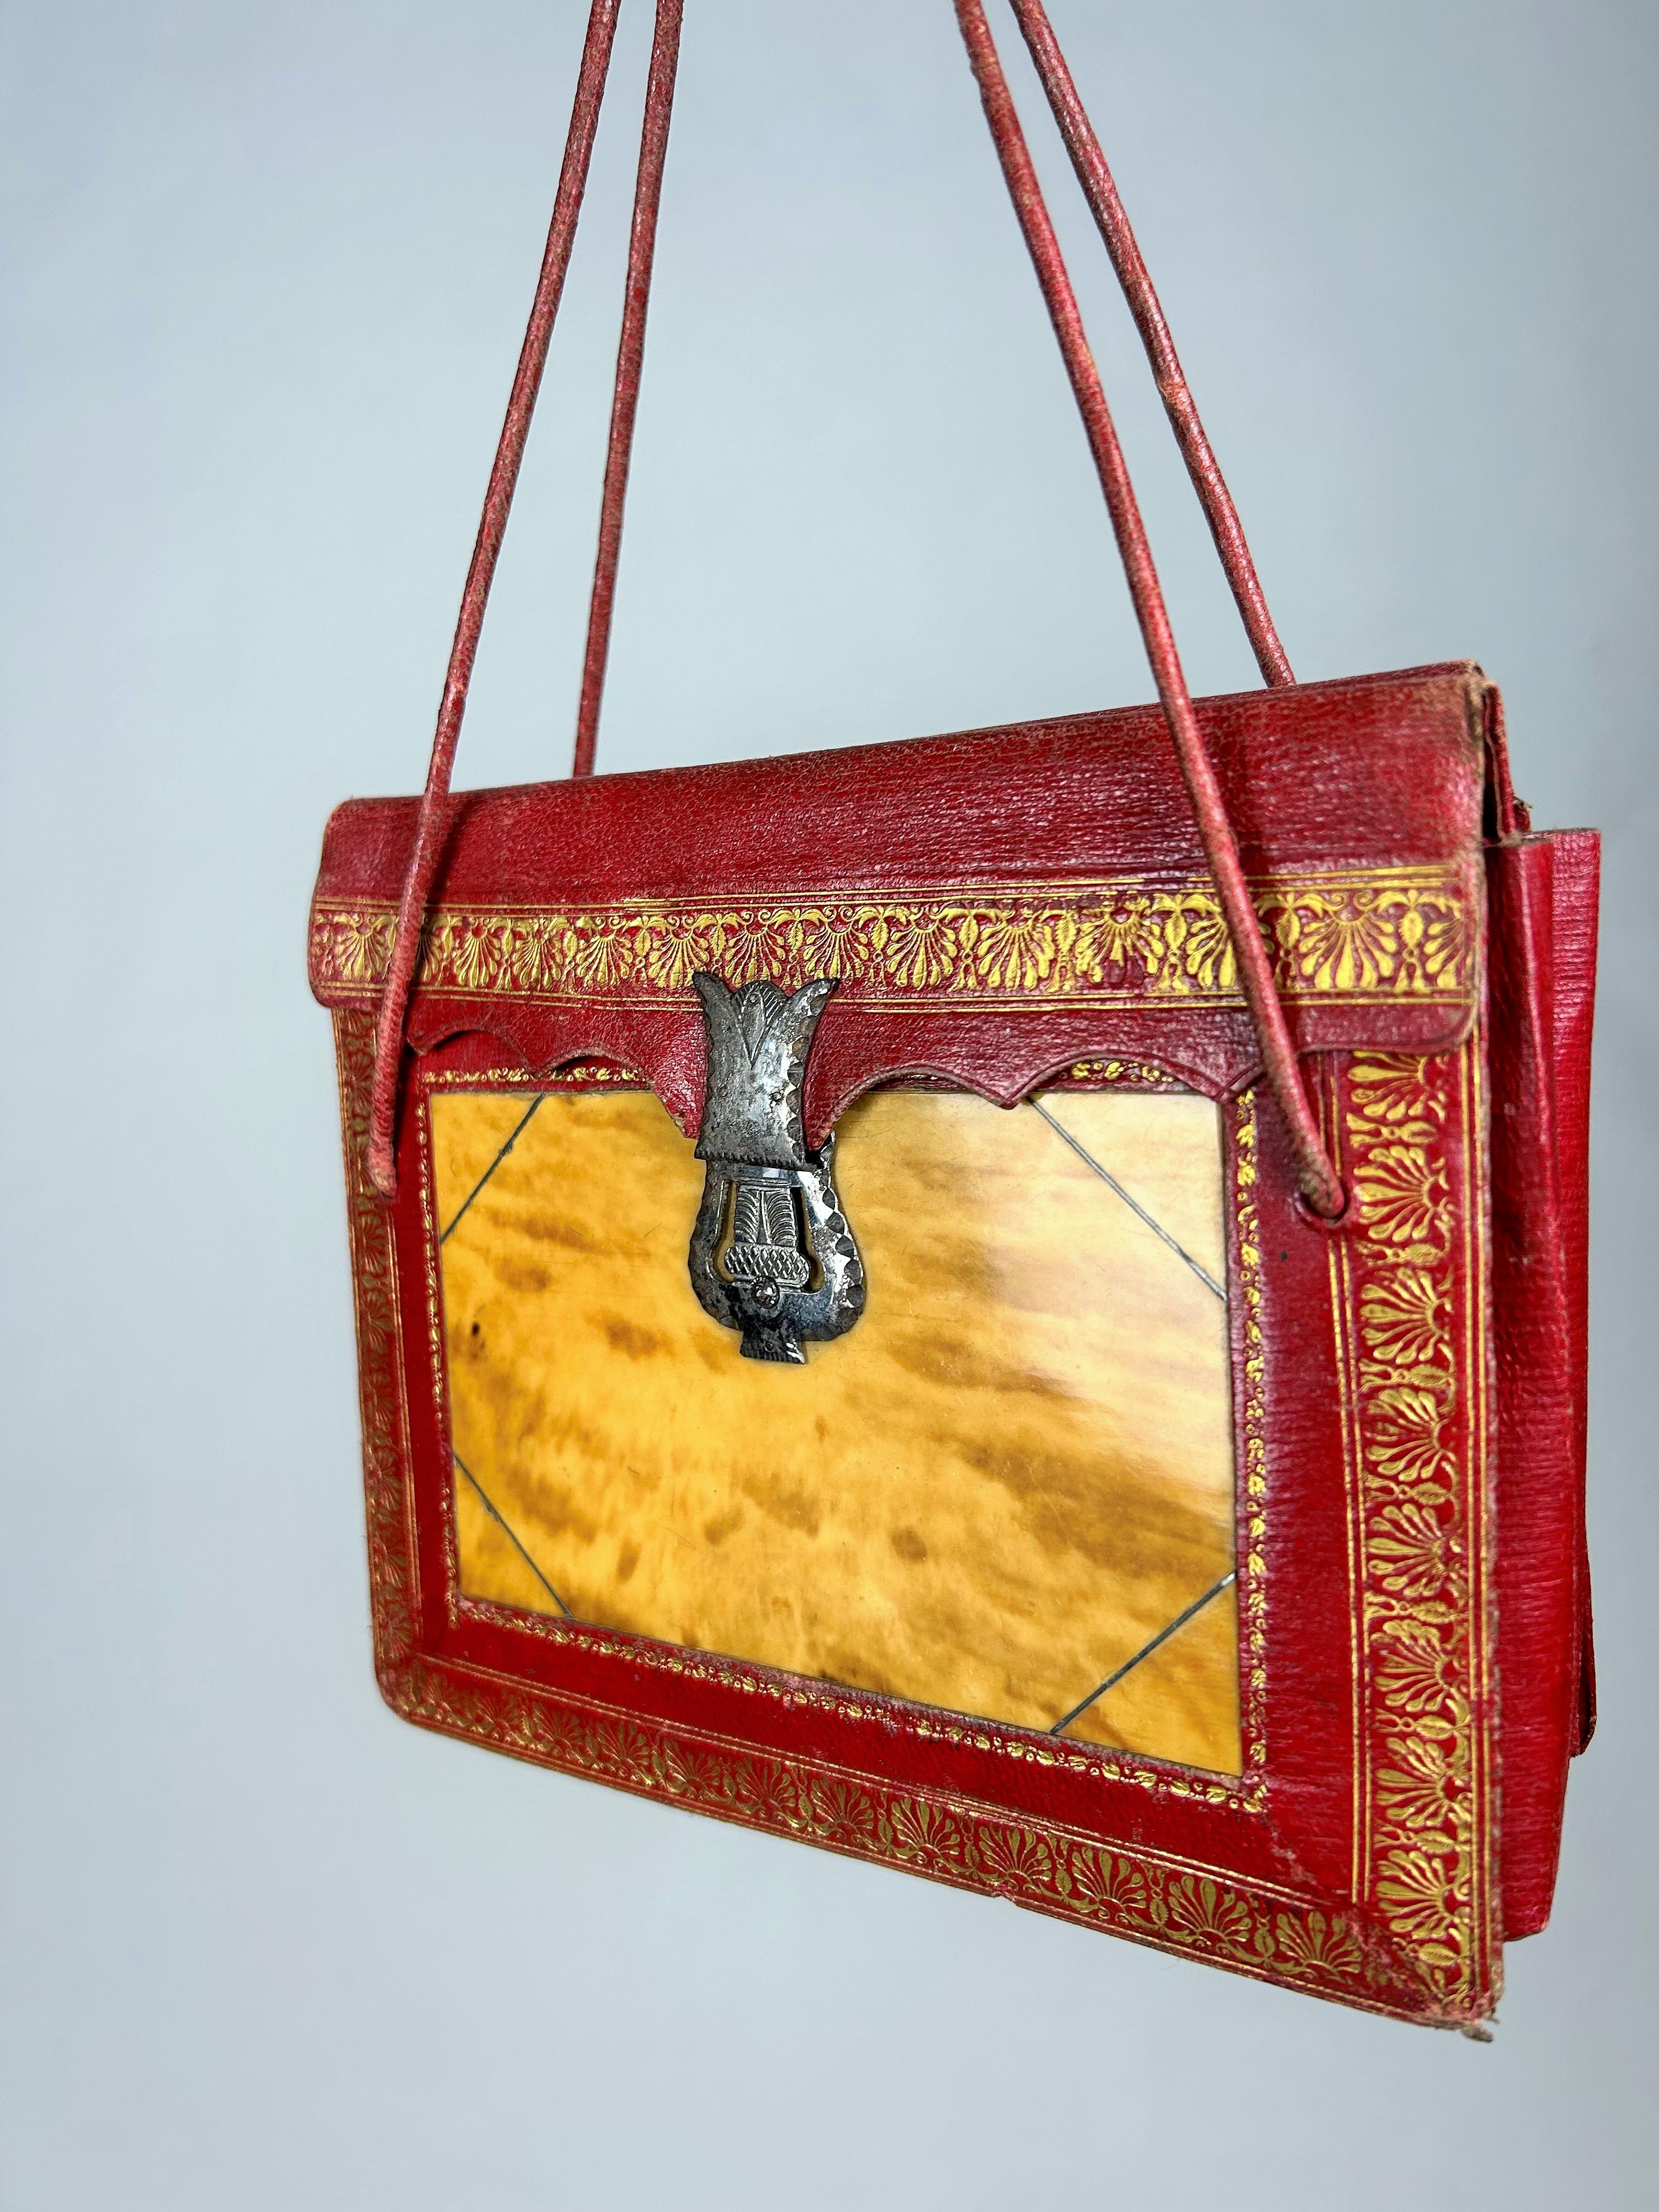 A precious red Leather Reticule with tortoiseshell inlay - England Dated 1836 For Sale 2